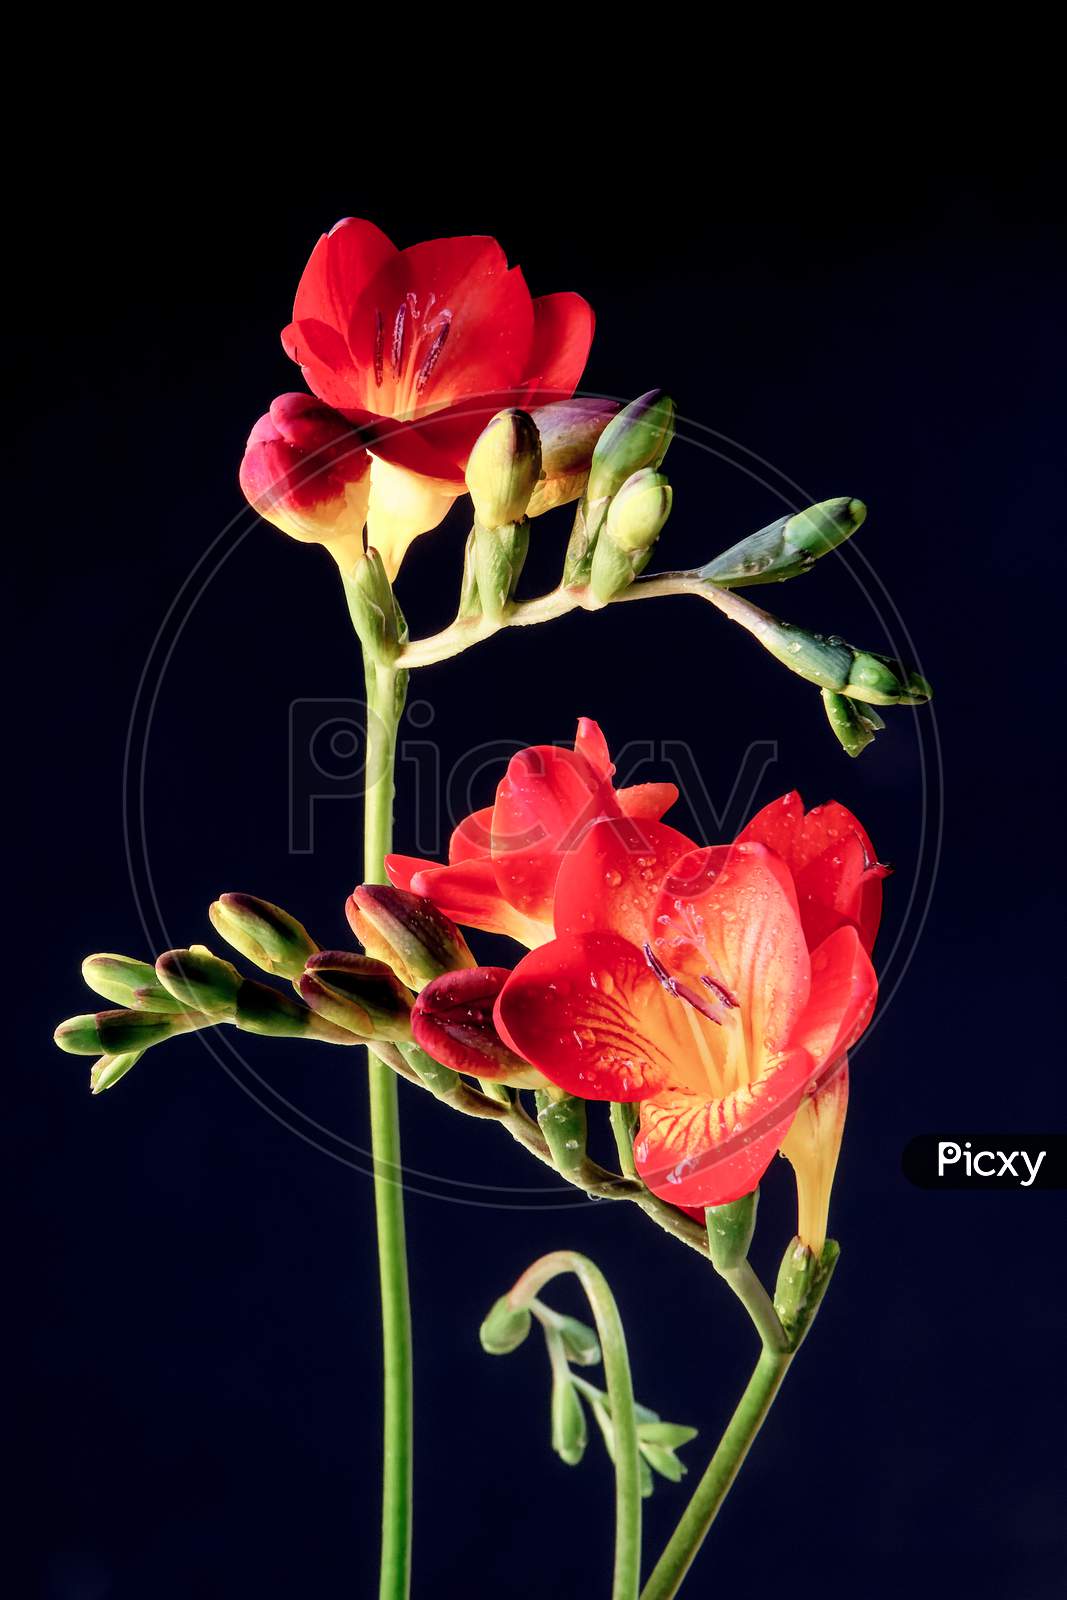 Close-Up Of Red And Yellow Freesias (Iridaceae)